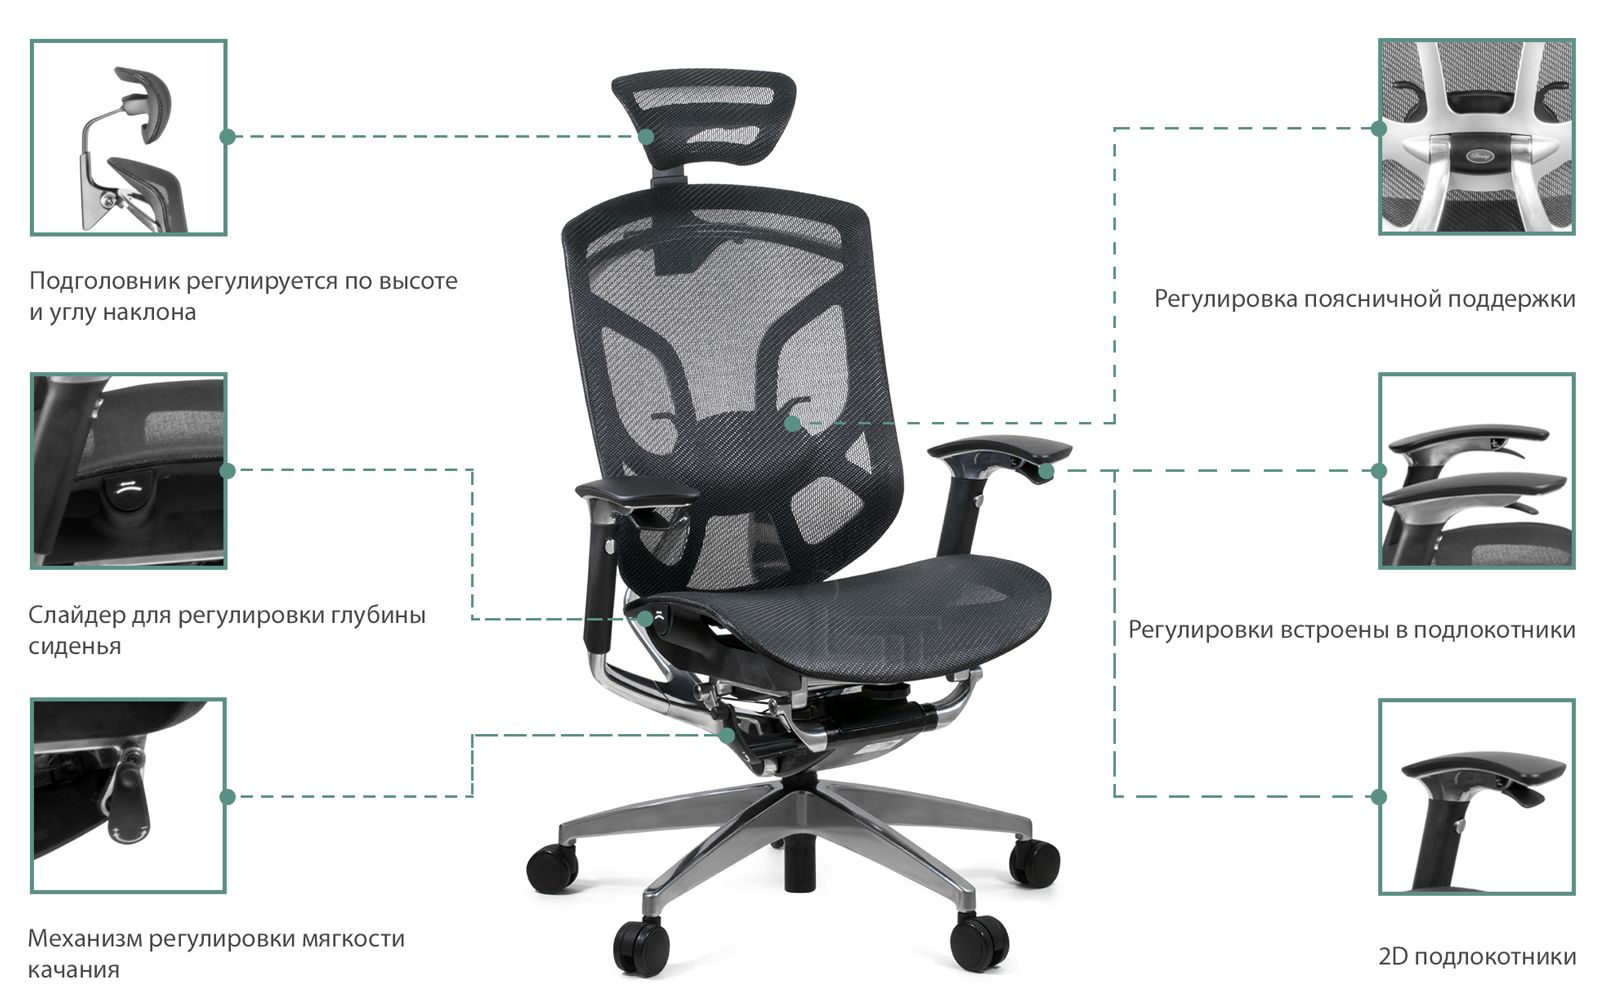 gtchair dvary size features1